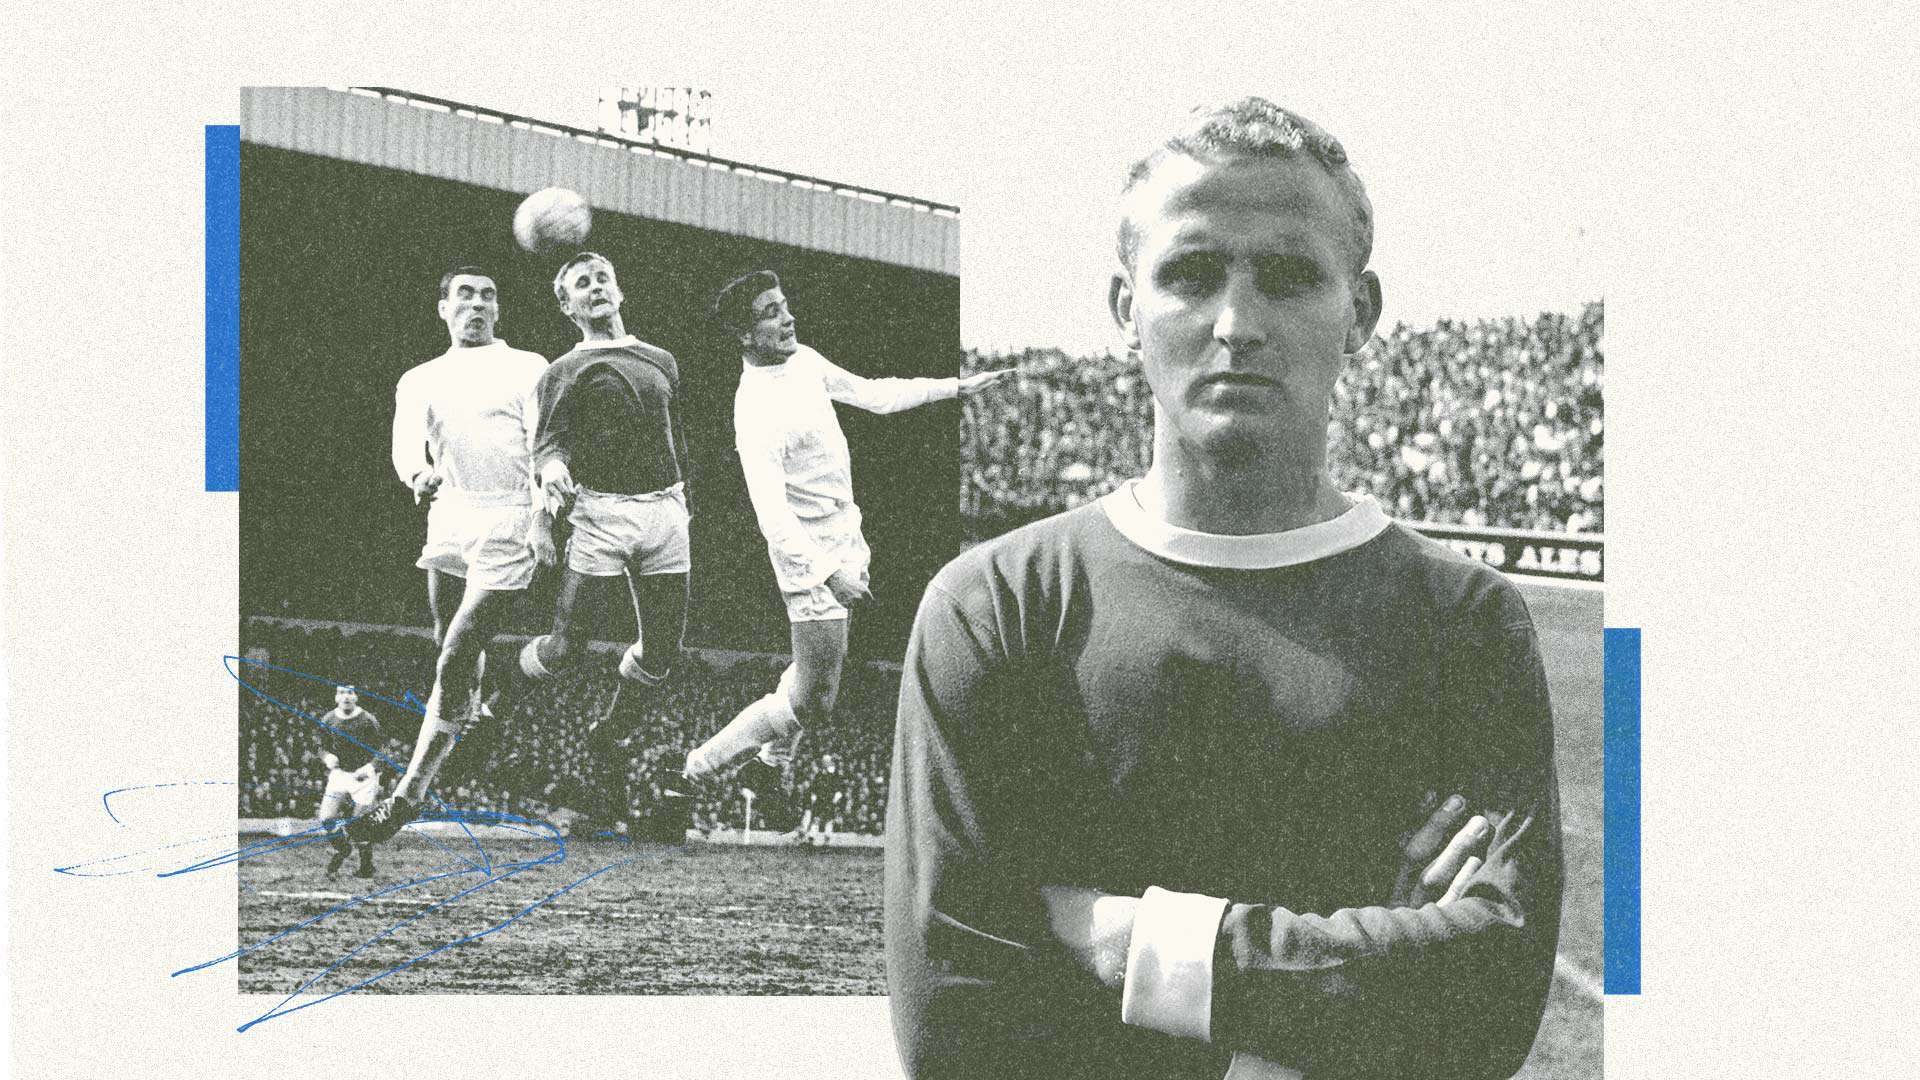 Alex Young, a 1960s Evertonian, but the photo includes Norman Hunter and Willie Bell so there's some solid Leeds there